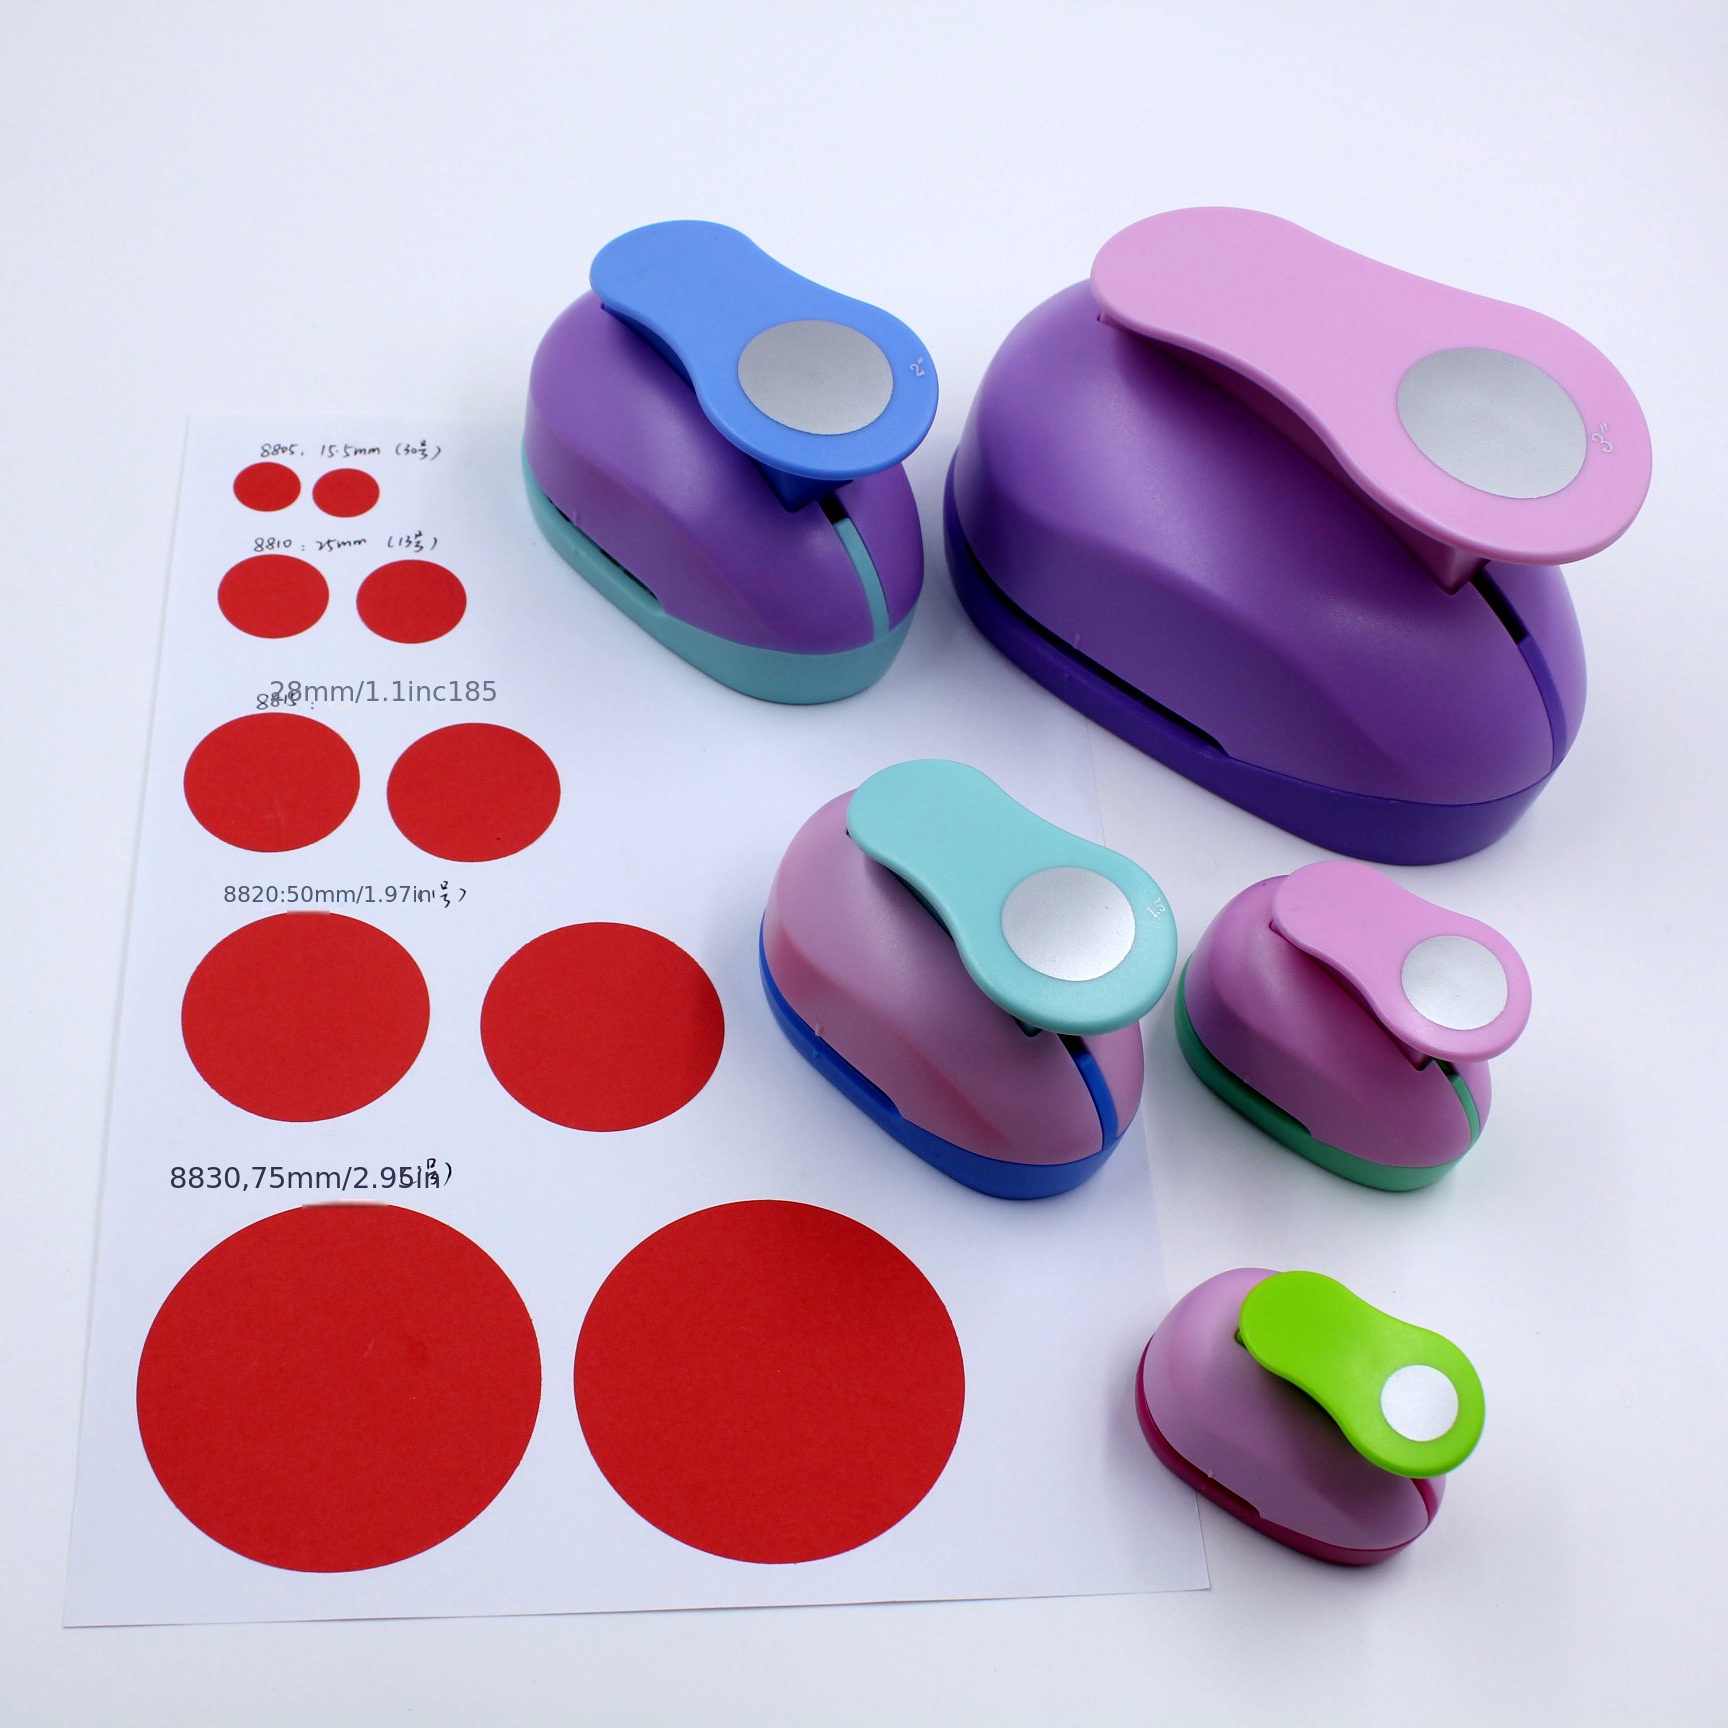 Circle Punch 8-50mm DIY Craft Hole Punch For Scrapbooking Set